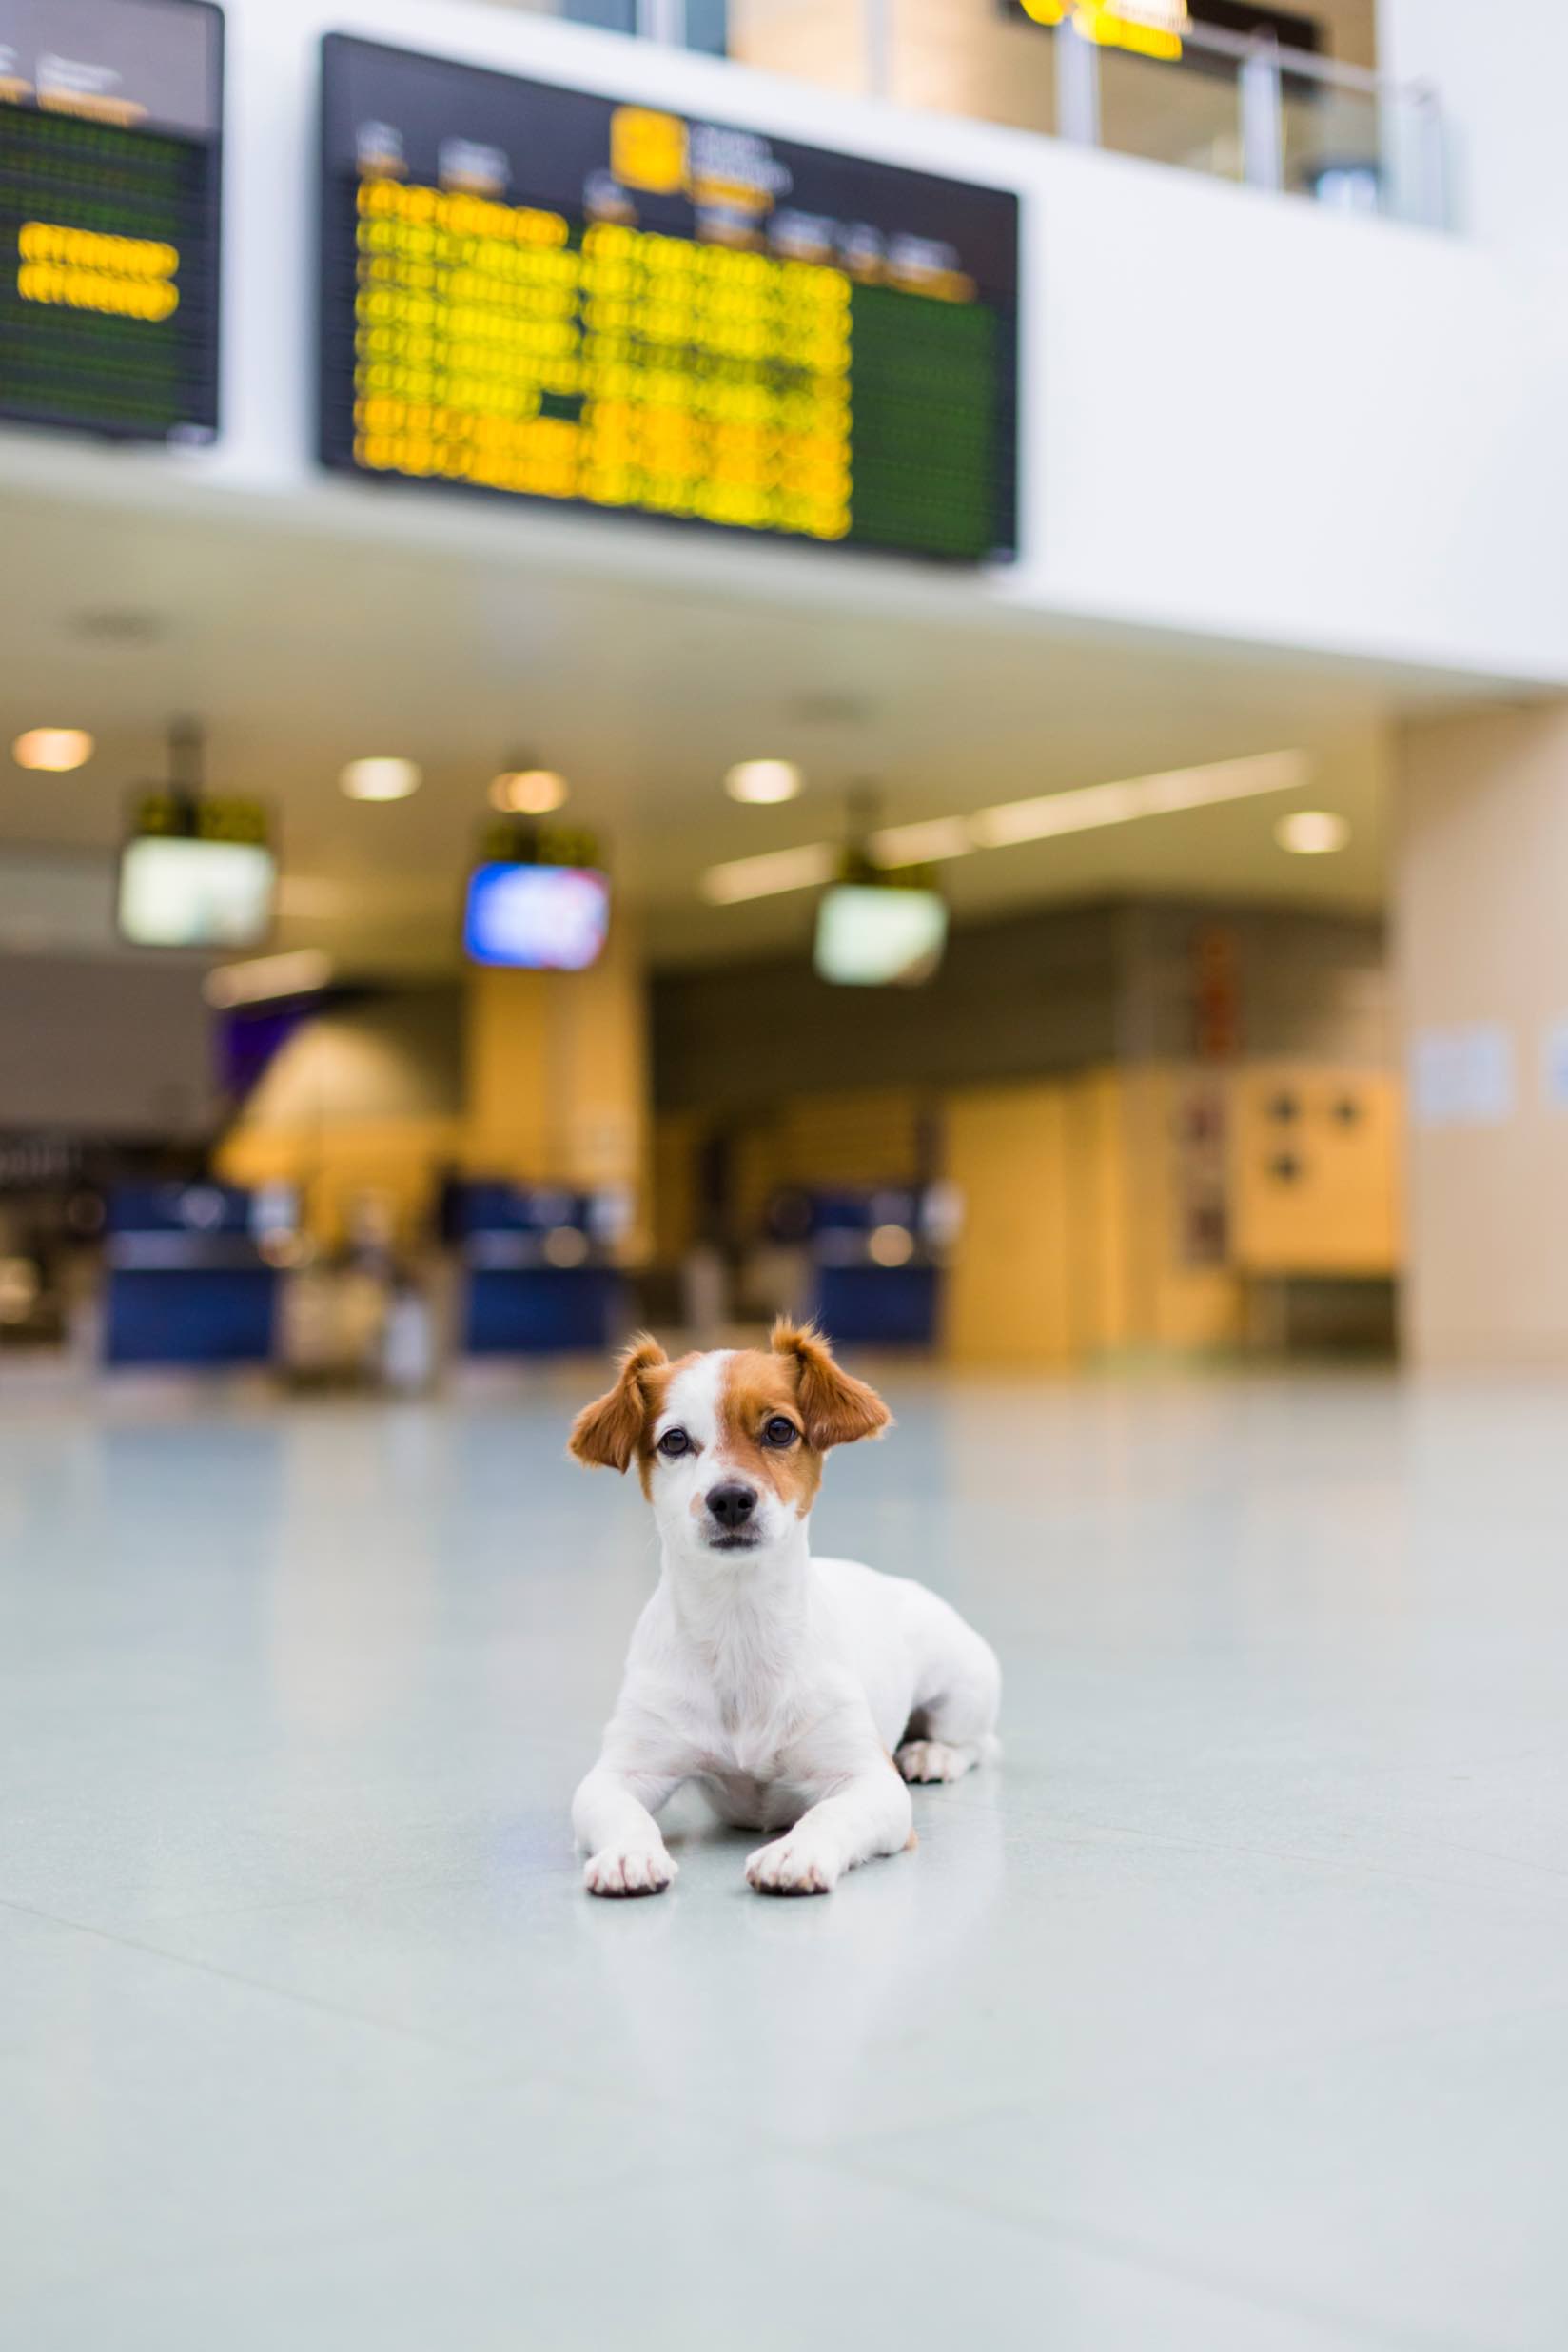 This pup is happy to behave at the airport, especially thanks to training from Dog Training Elite in Orlando.